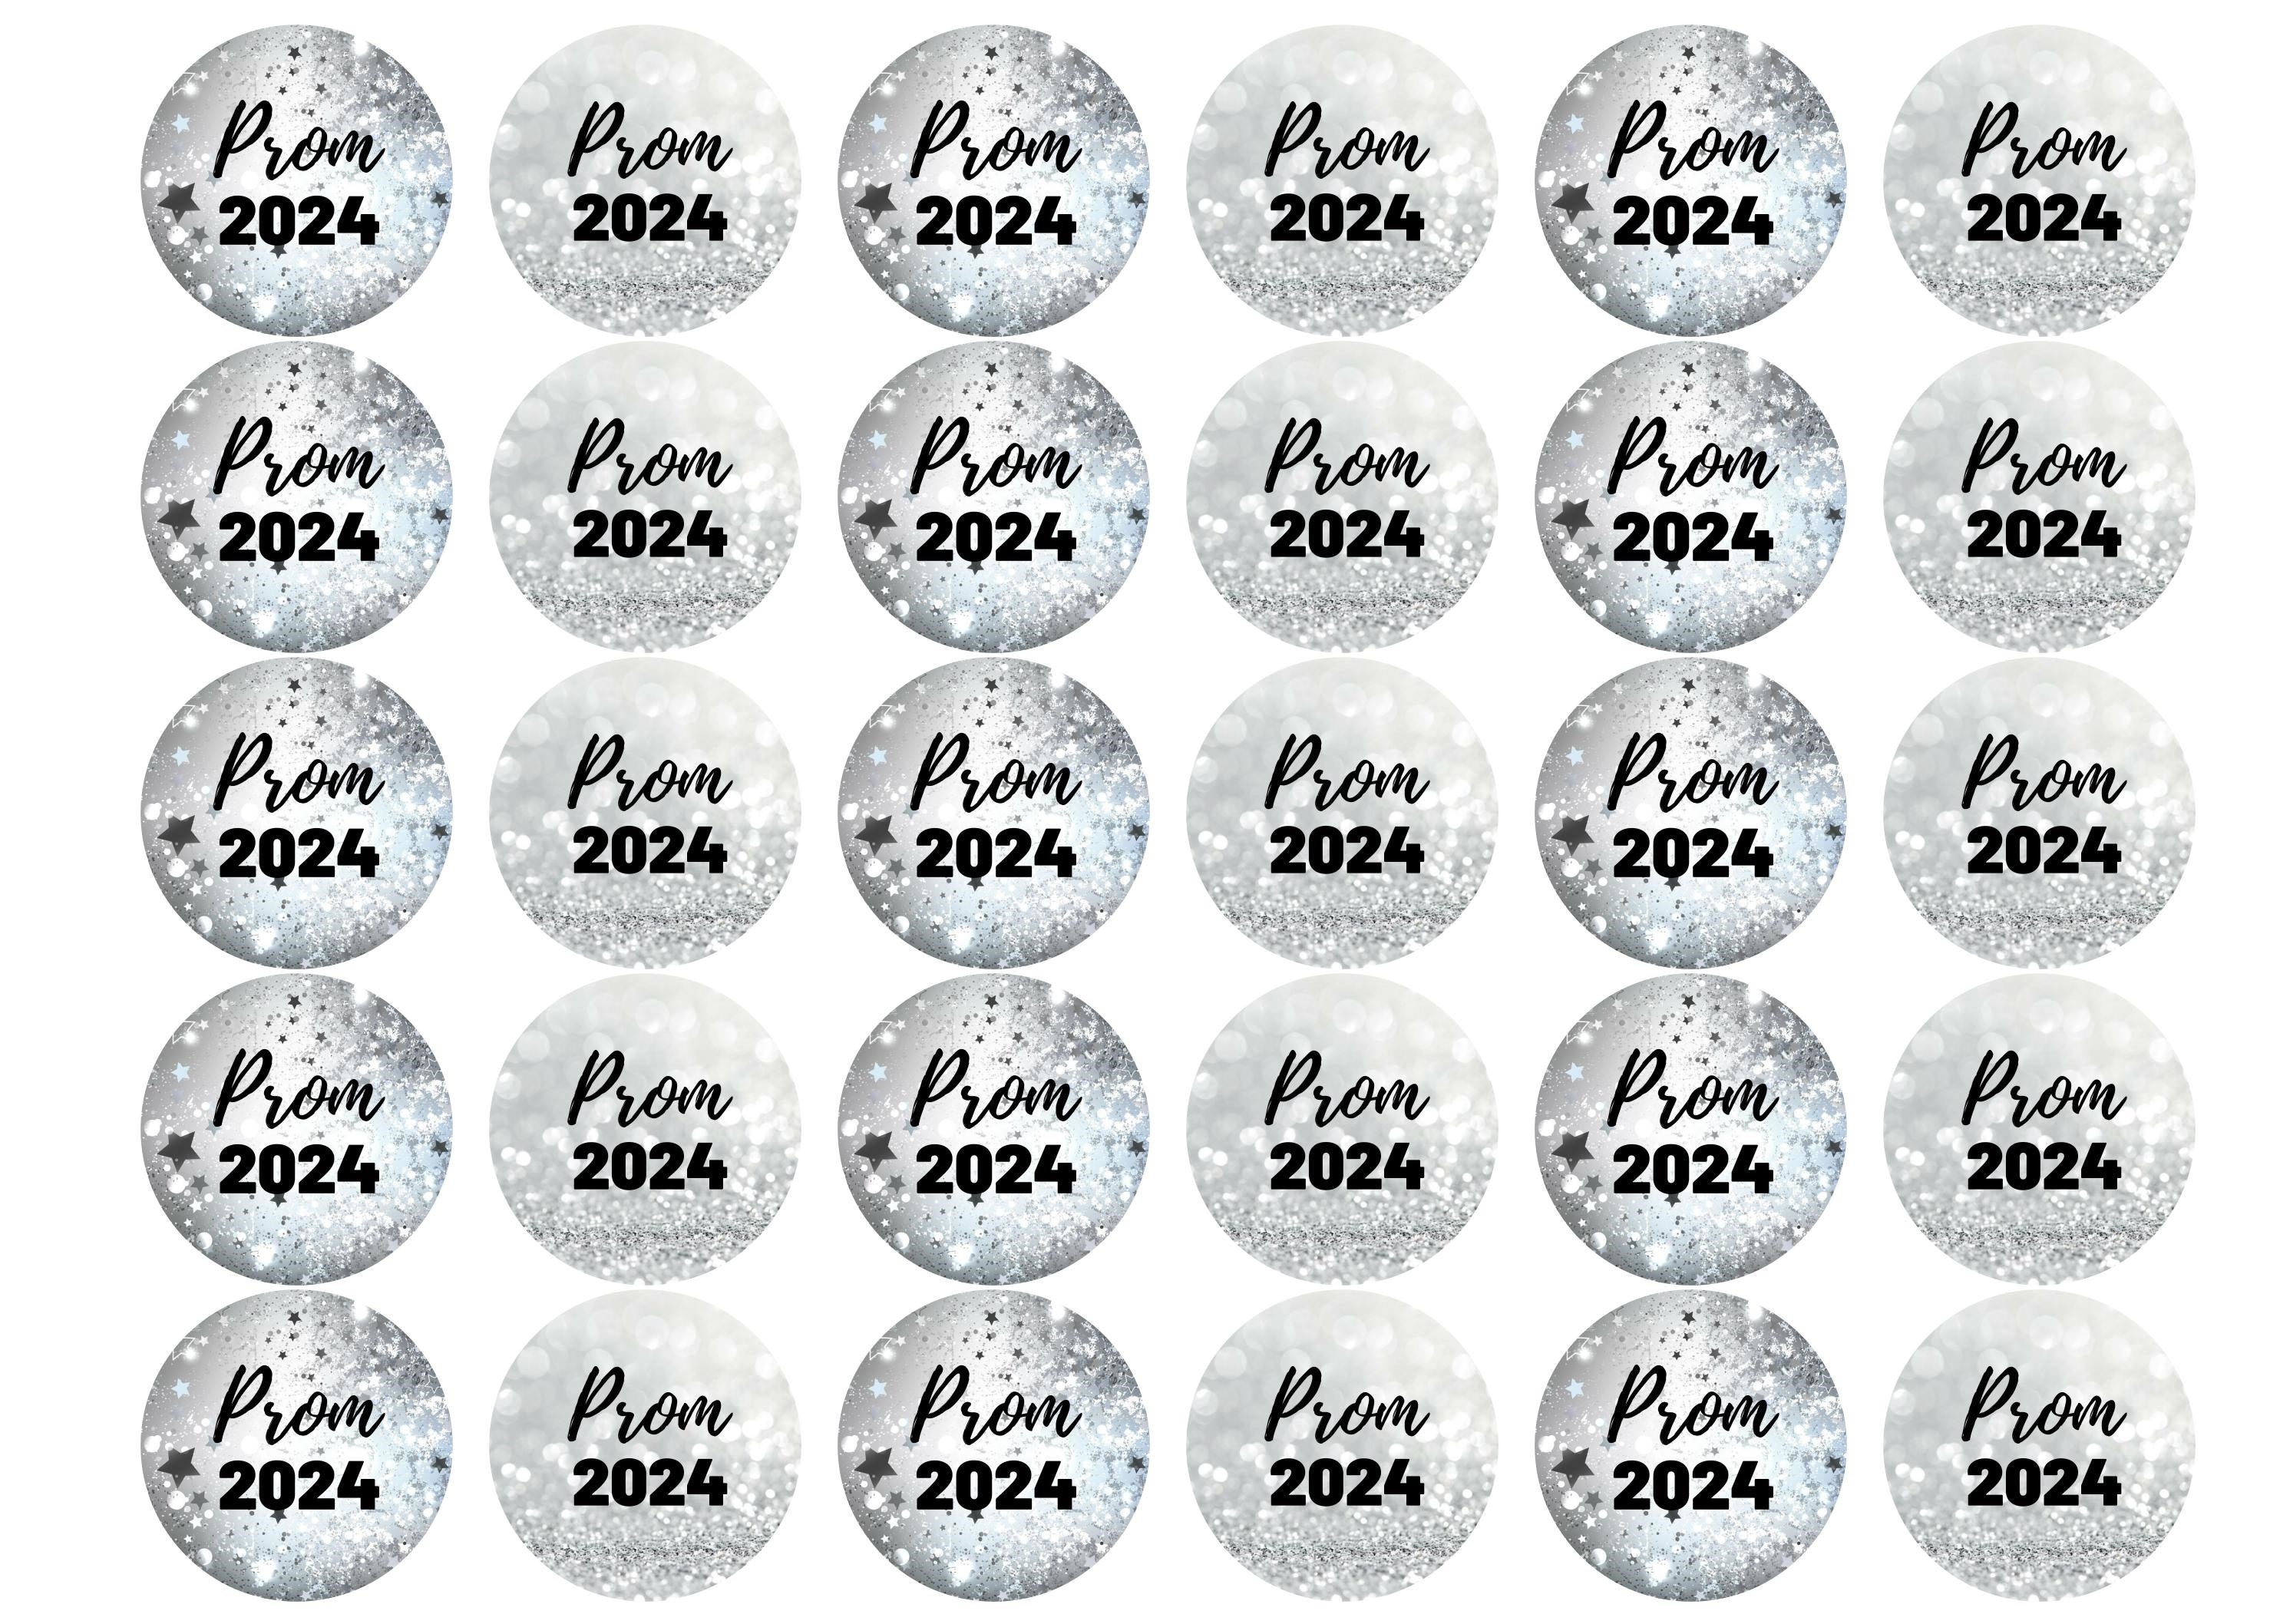 30 cupcake toppers with a Prom 2024 design in silver